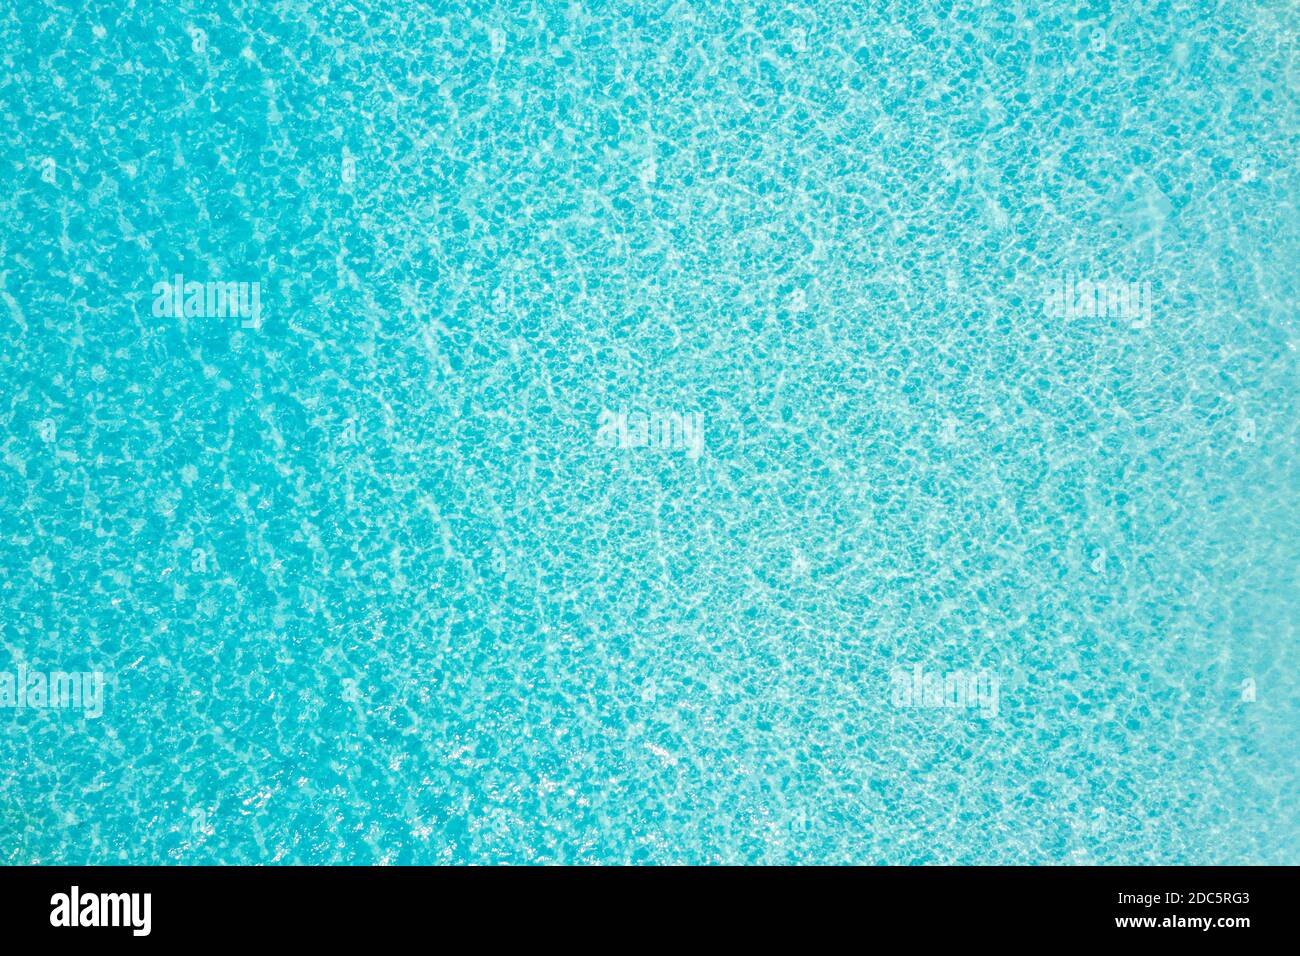 Sea from above drone view. Blue sea surface, top view. Amazing nature ocean pattern, shallow lagoon, tropical water. Relaxing natural environment Stock Photo